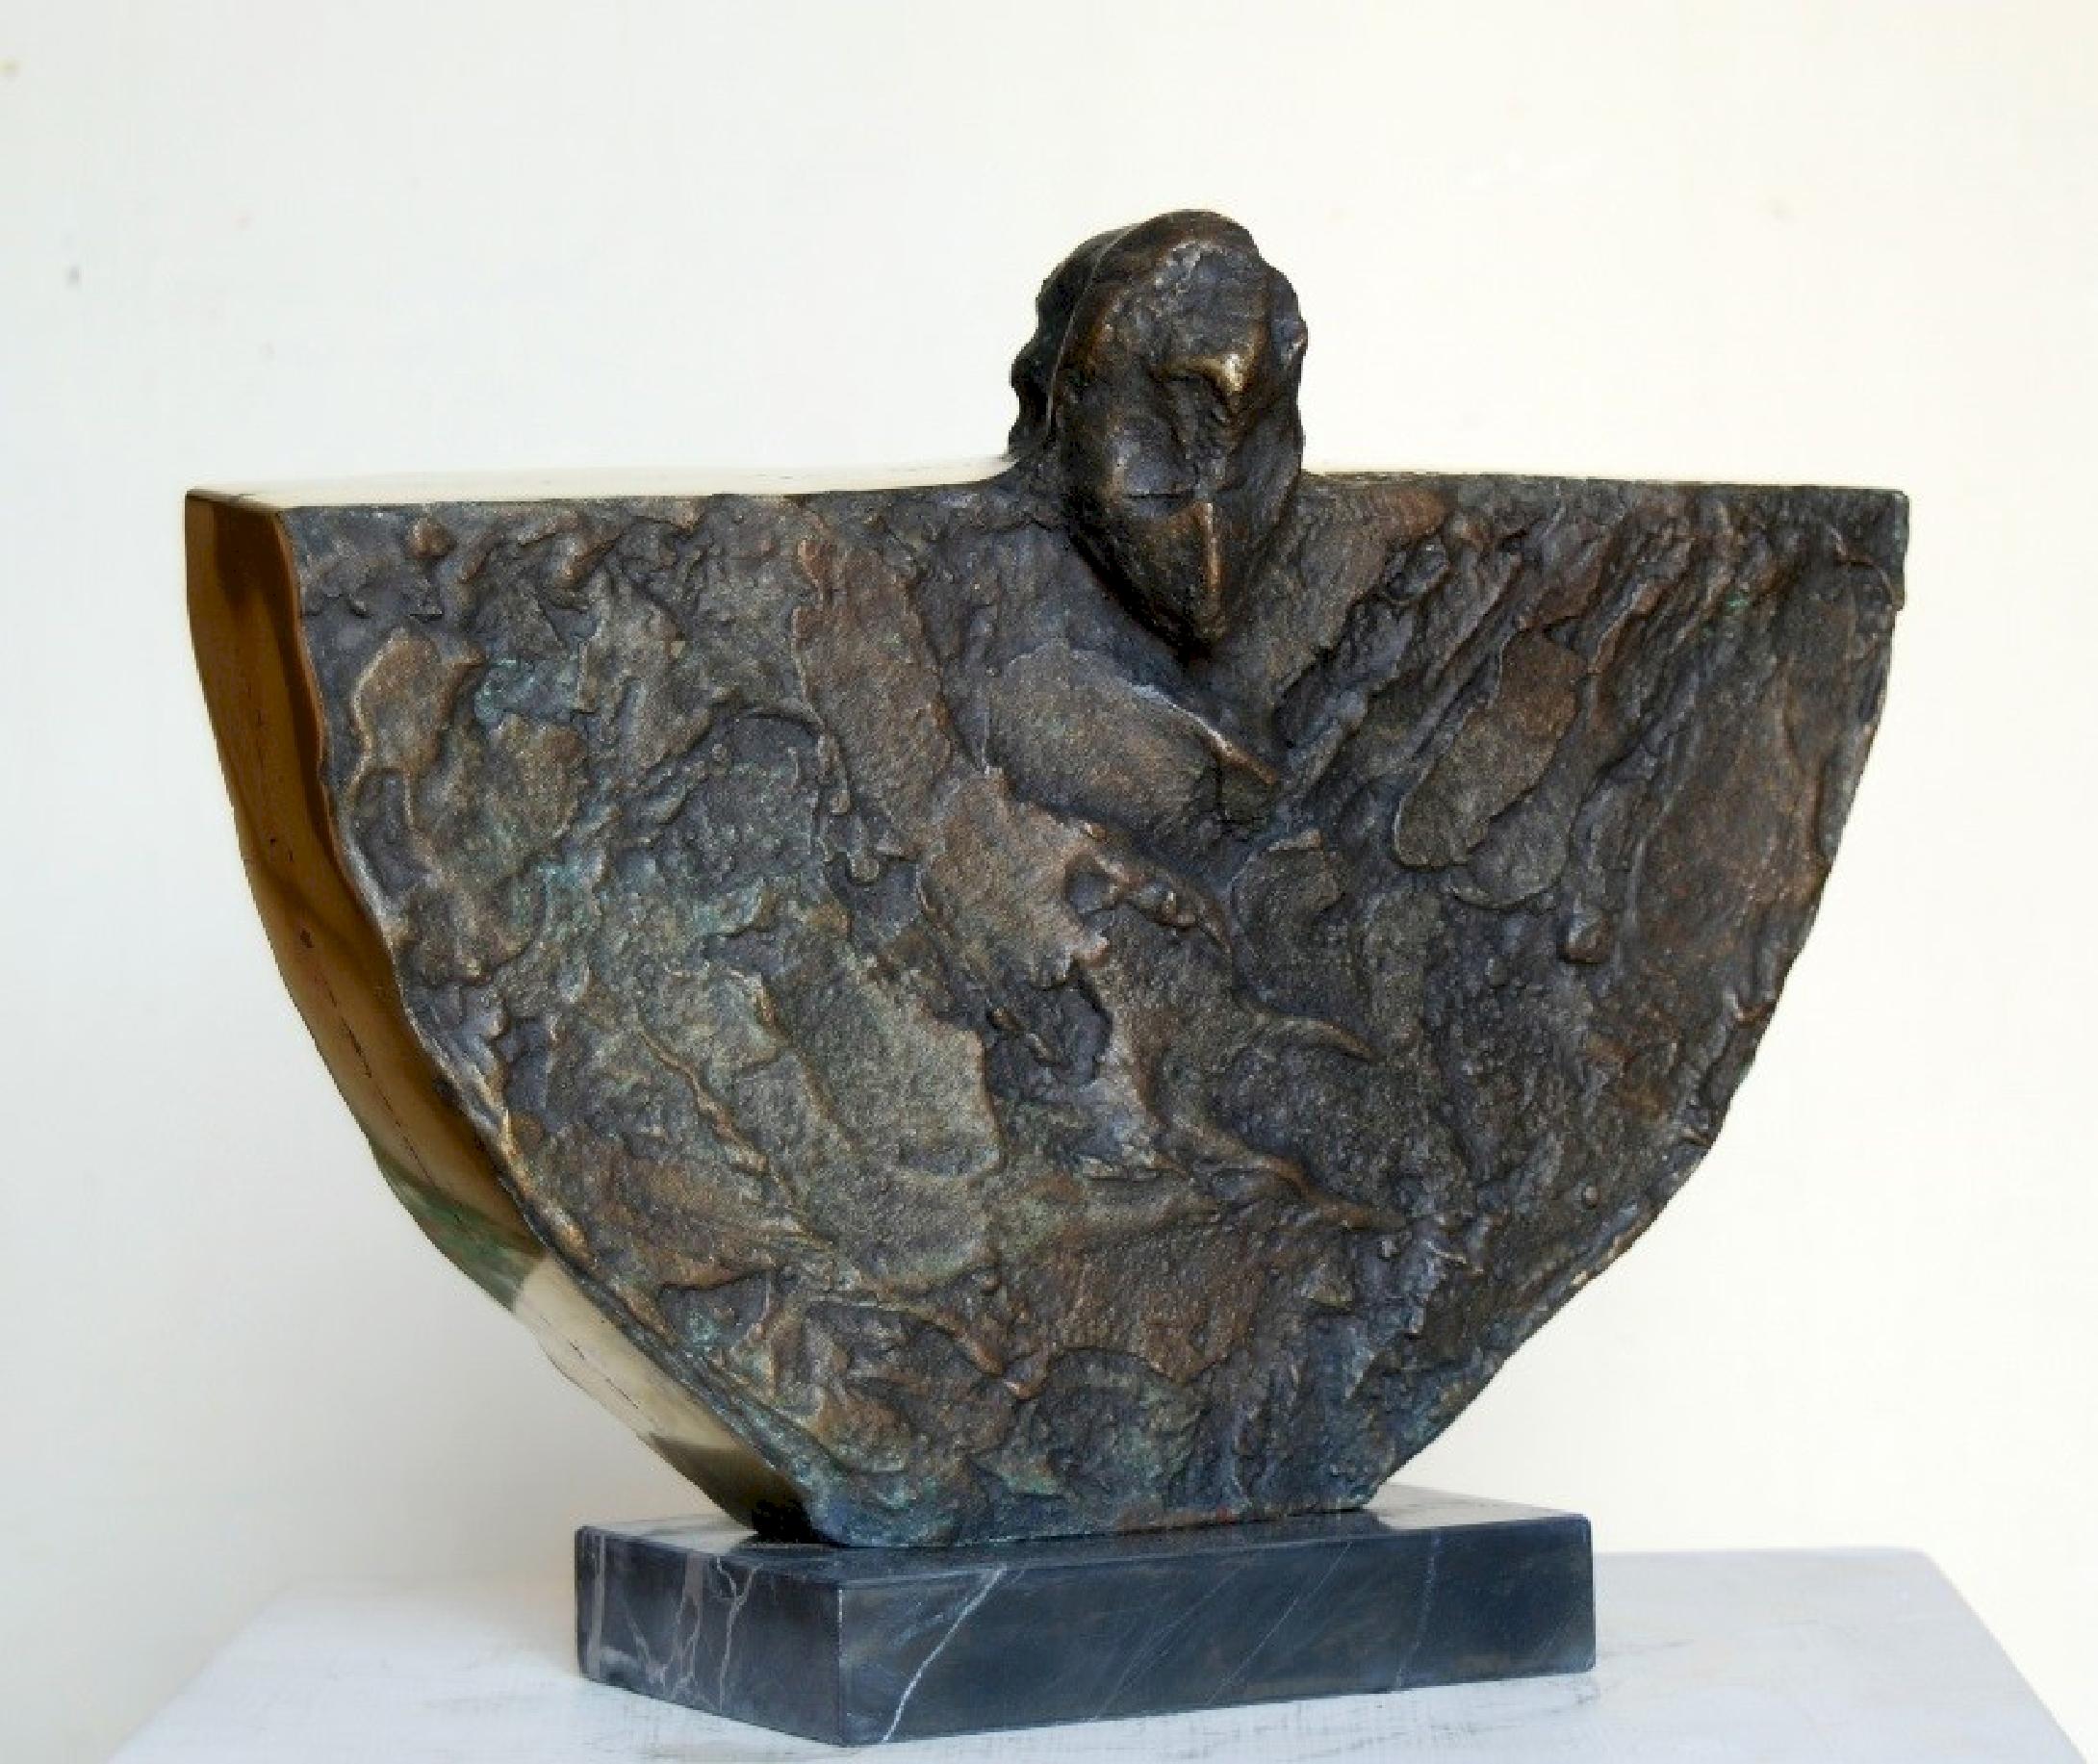 "Freedom" Bronze Sculpture 10" x 14" x 4" inch by Sarkis Tossonian		

* Due to the Ministry of Culture policy, handling time (paperwork) may take up to 2-3 weeks. 

Sarkis Tossoonian was born in Alexandria in 1953. He graduated from the Faculty of